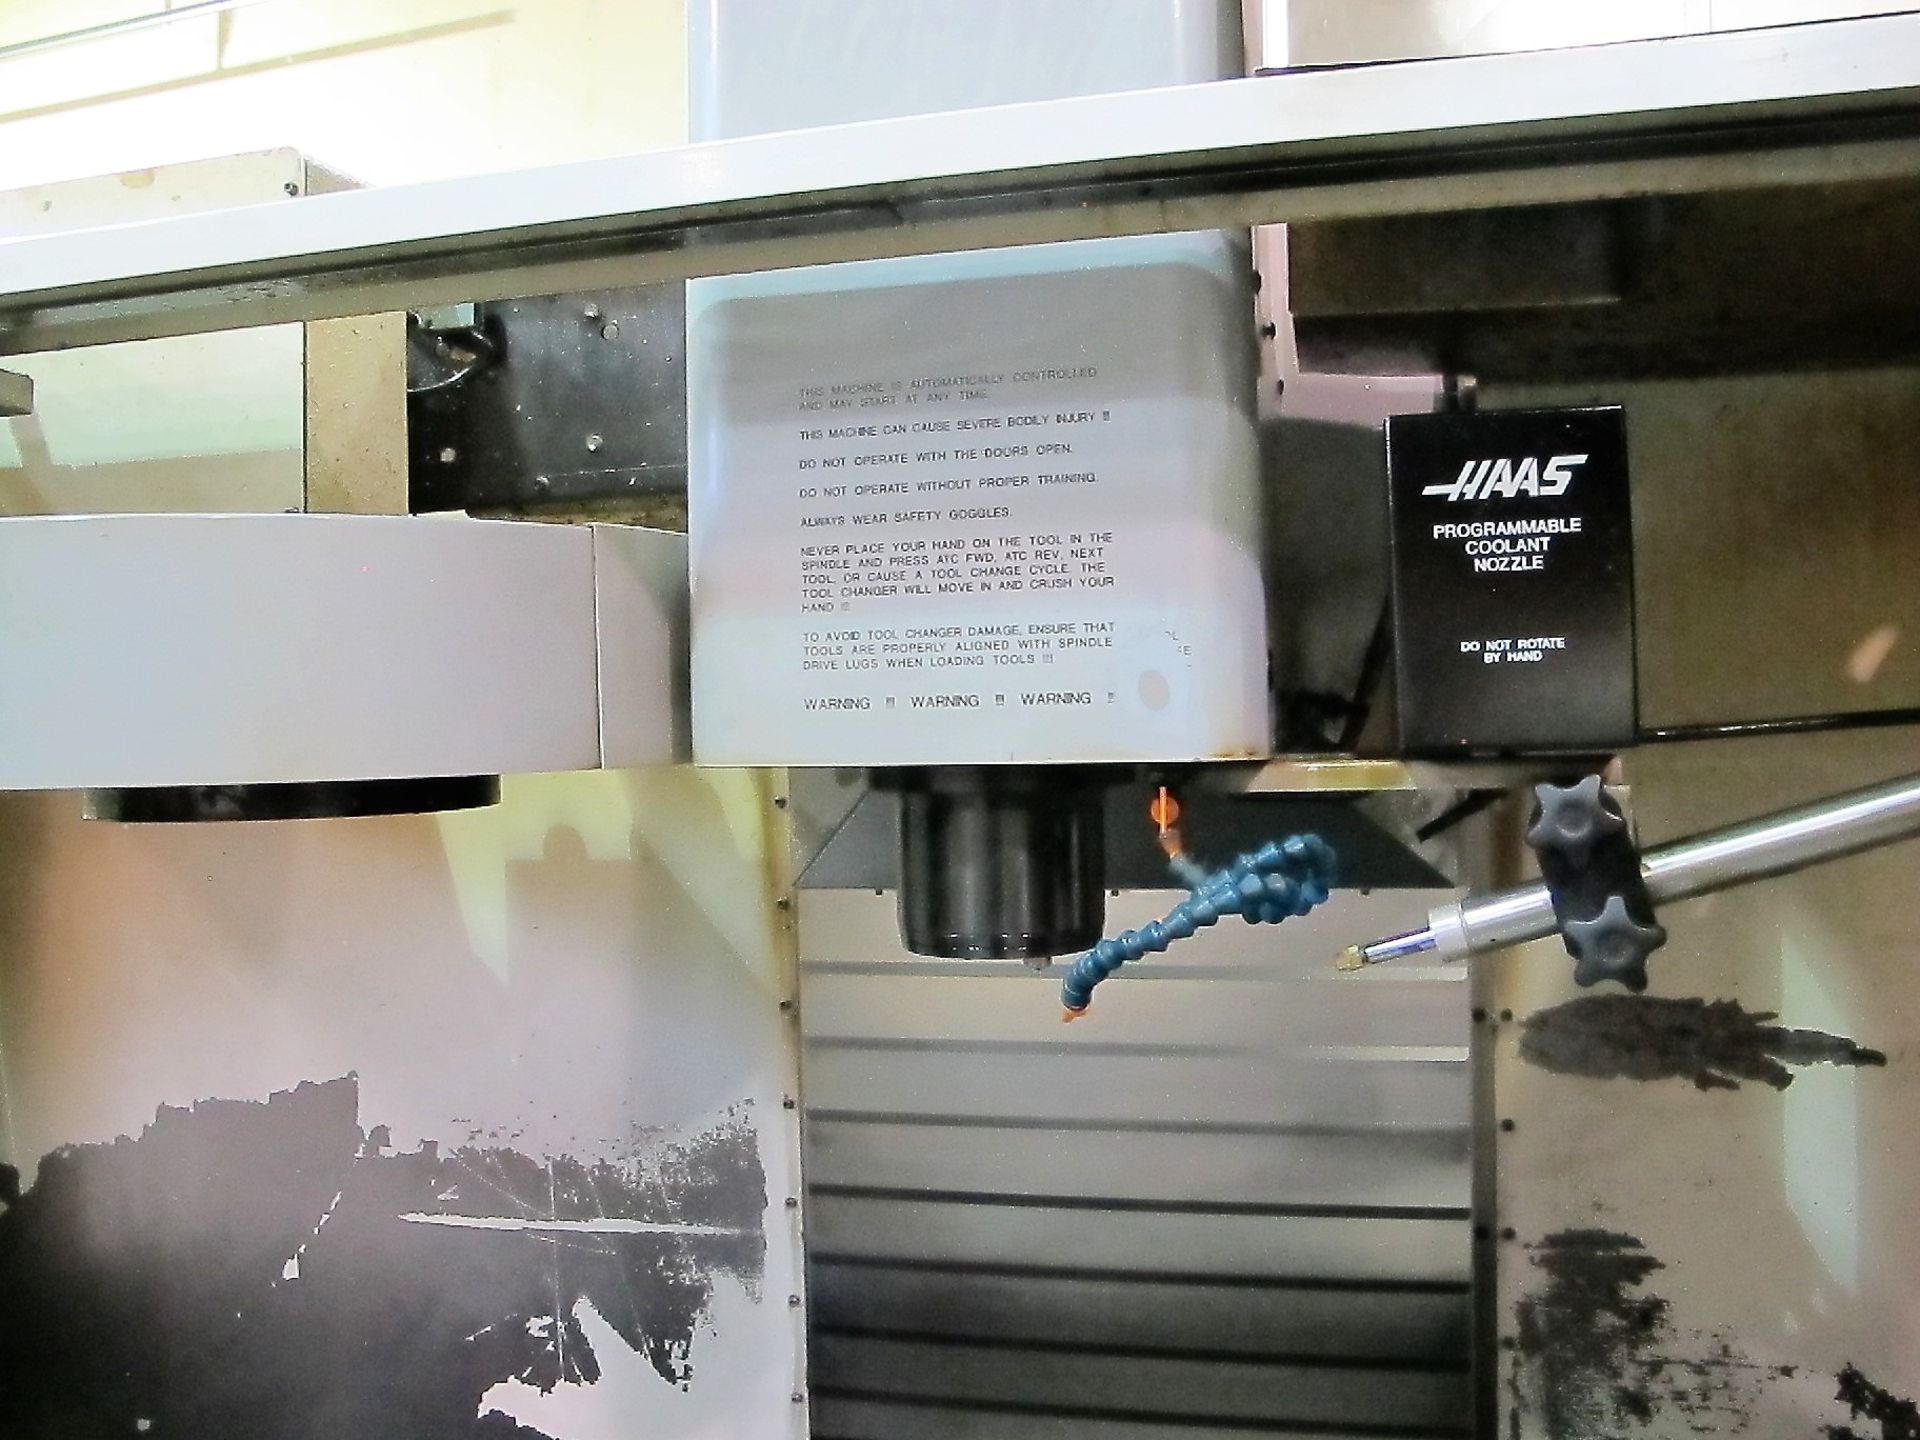 HAAS VF3 CNC VERTICAL MACHINING CENTER, 30 HP, HIGH TORQUE, 40 TAPER, 18" X 48" TABLE, (20) ATC, - Image 2 of 20